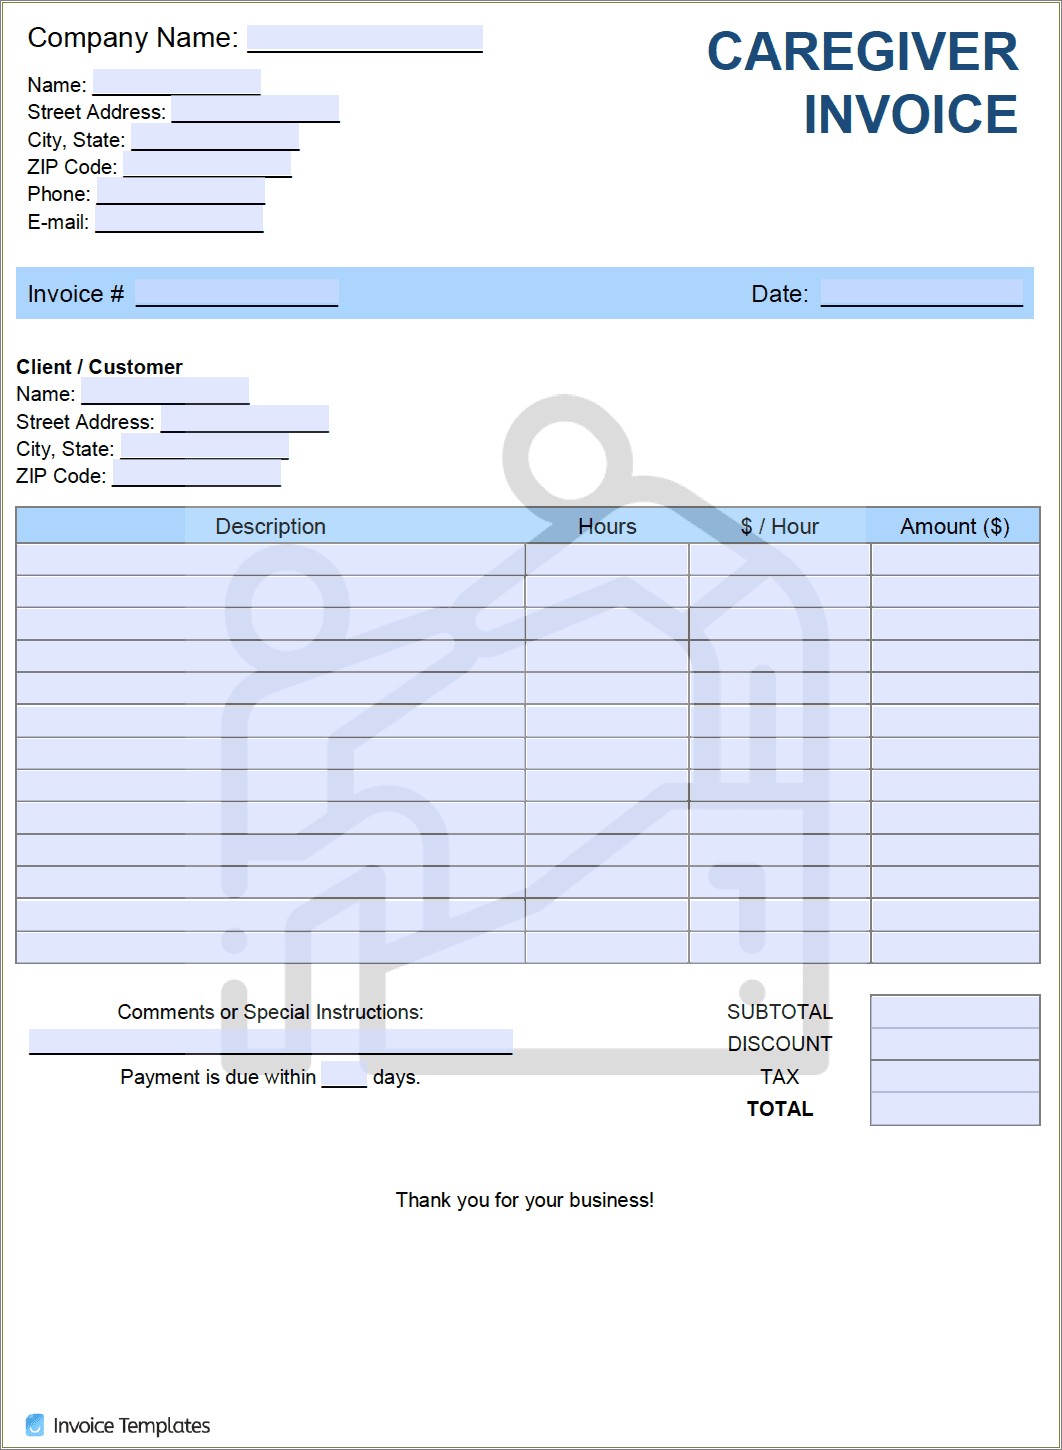 Doctor's Office Invoice Template Free